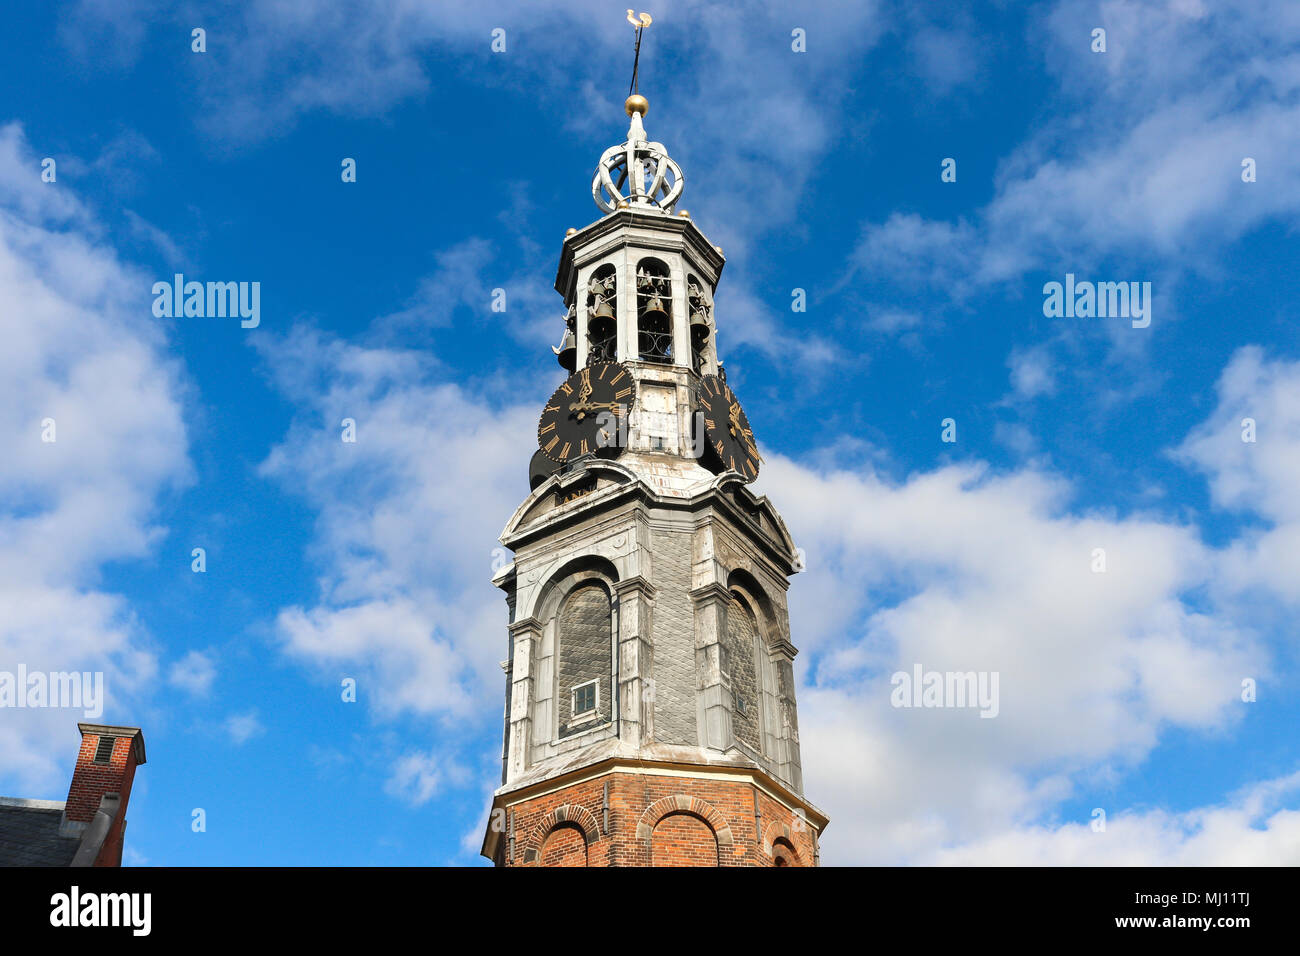 Munttoren (Mint Tower) in Muntplein Square, Amsterdam, where the Amstel river meets the Singel canal. It houses 4 clock faces & a carillon of bells. Stock Photo